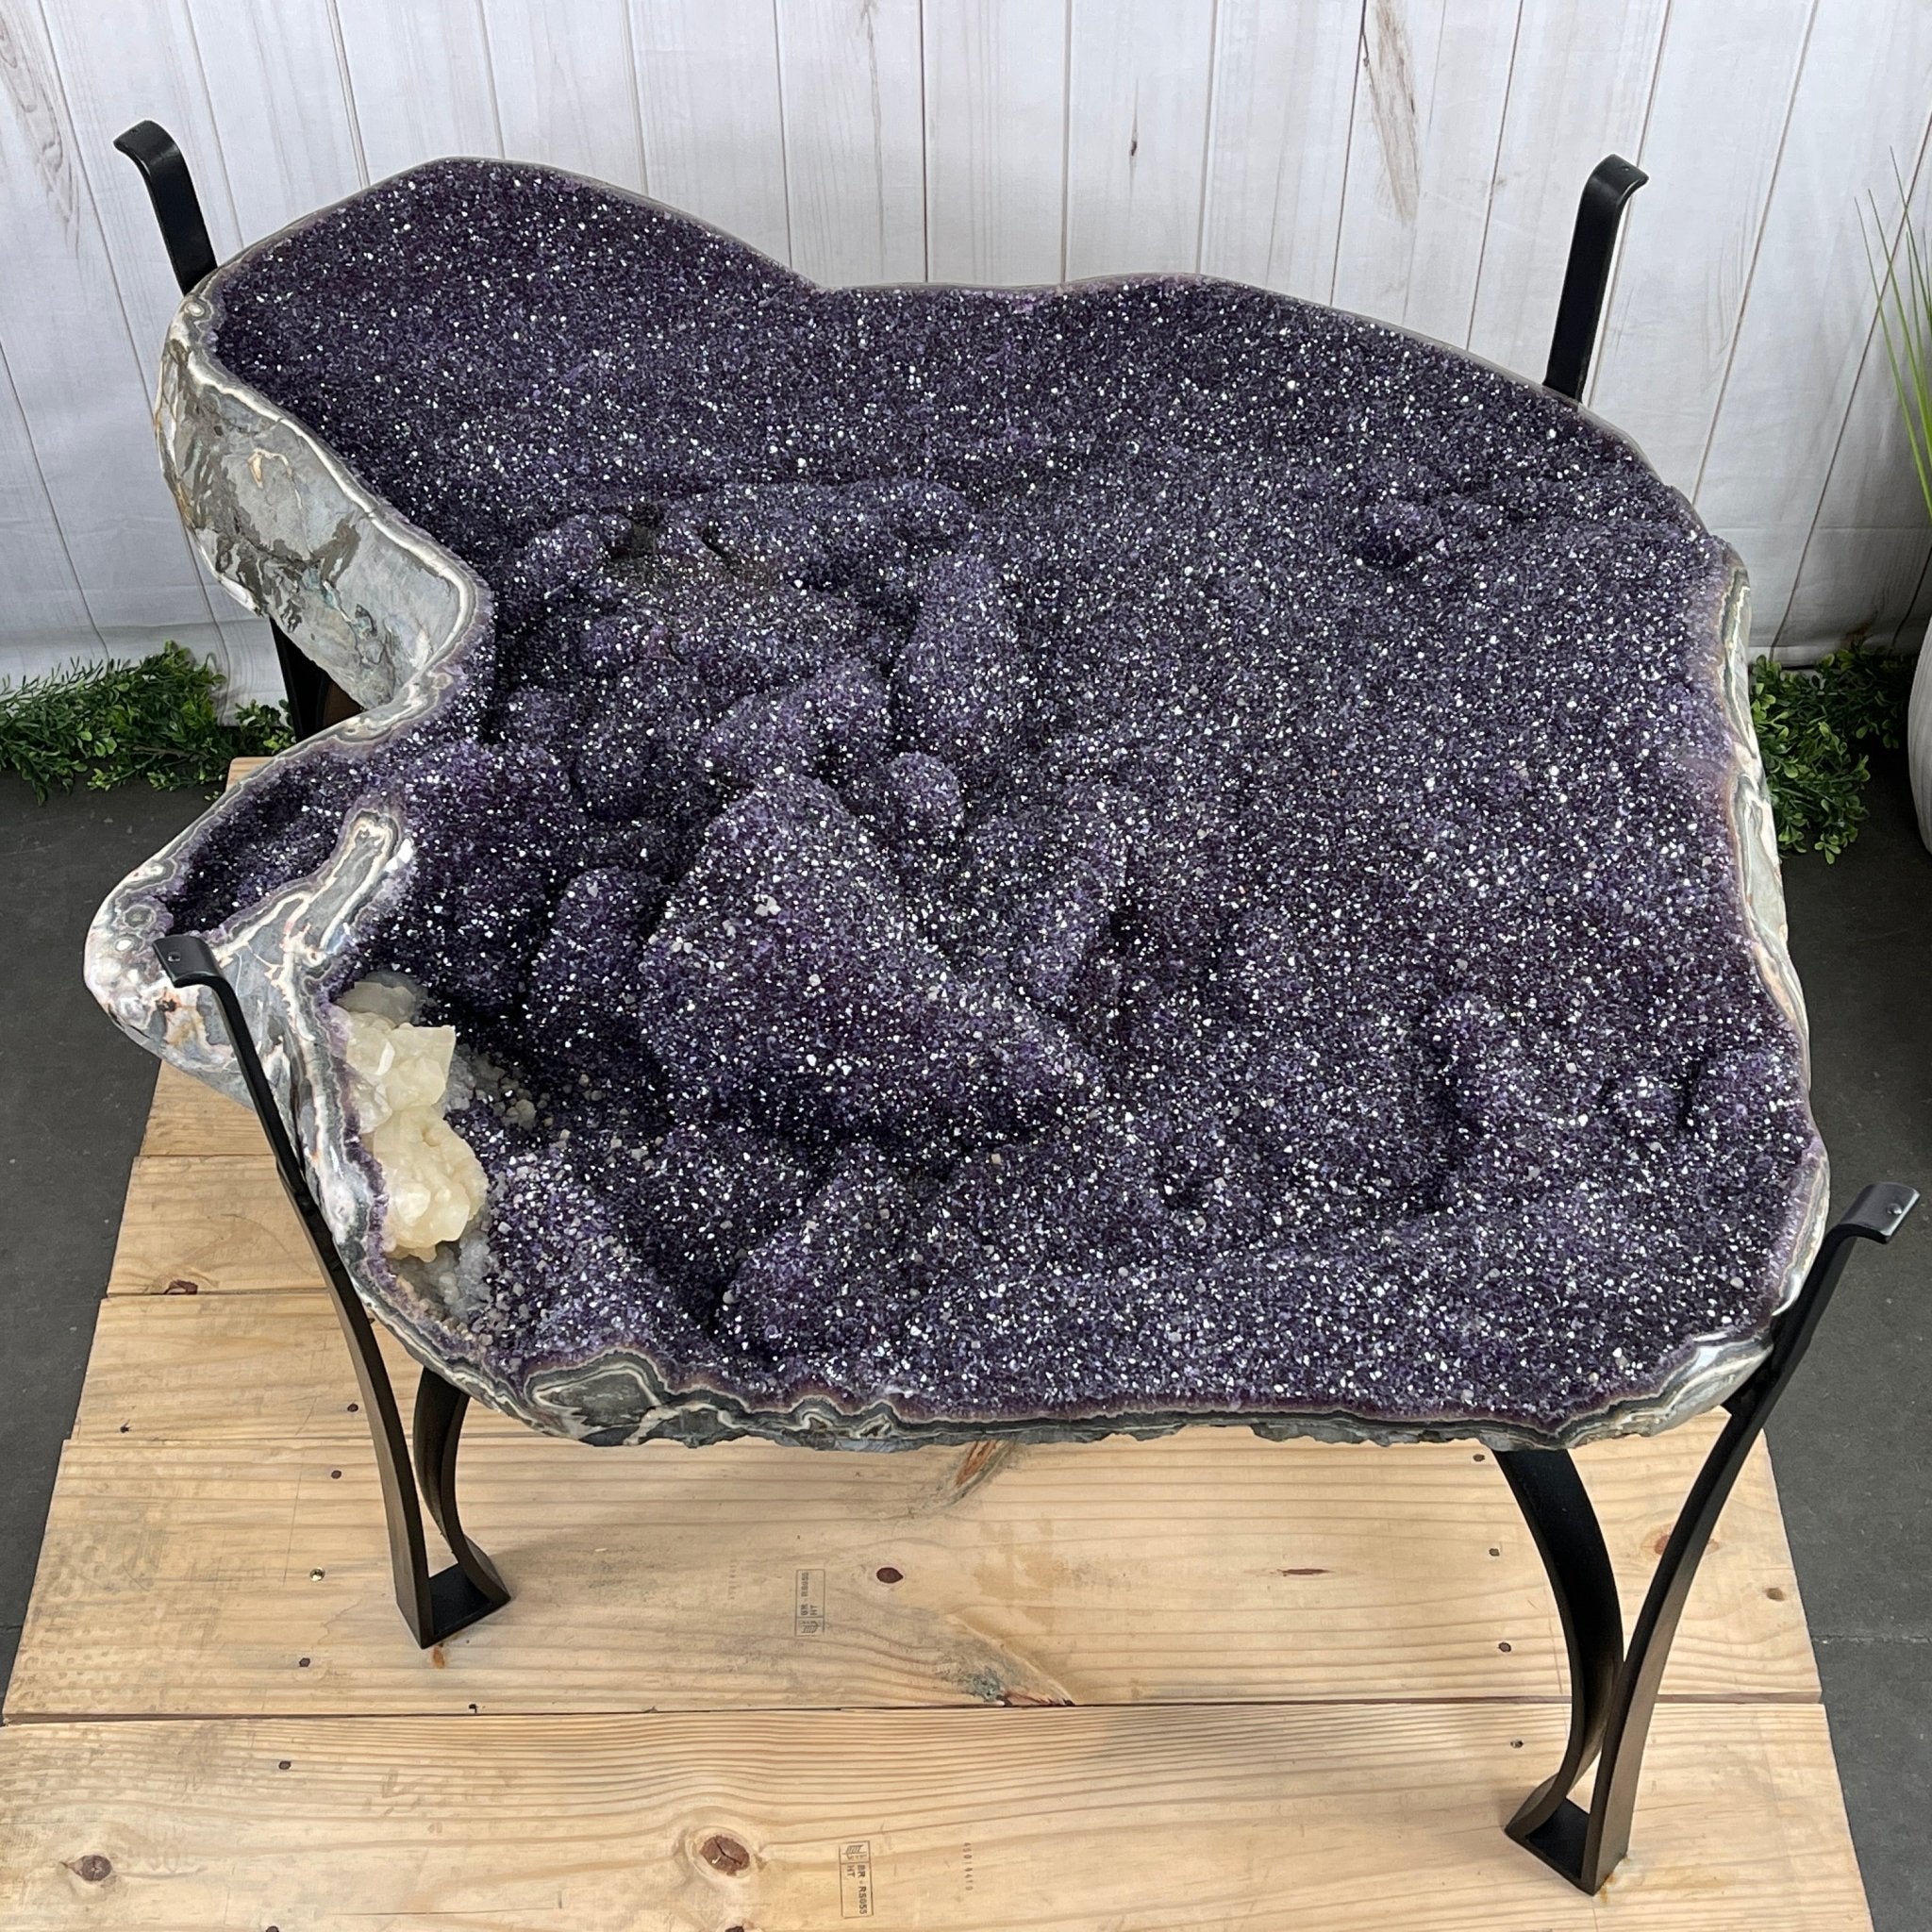 Large Special Amethyst Dining/Conference Table Super Quality, 814 lbs & 31.6" tall #1388-0001 by Brazil Gems - Brazil GemsBrazil GemsLarge Special Amethyst Dining/Conference Table Super Quality, 814 lbs & 31.6" tall #1388-0001 by Brazil GemsTables: Dining1388-0001